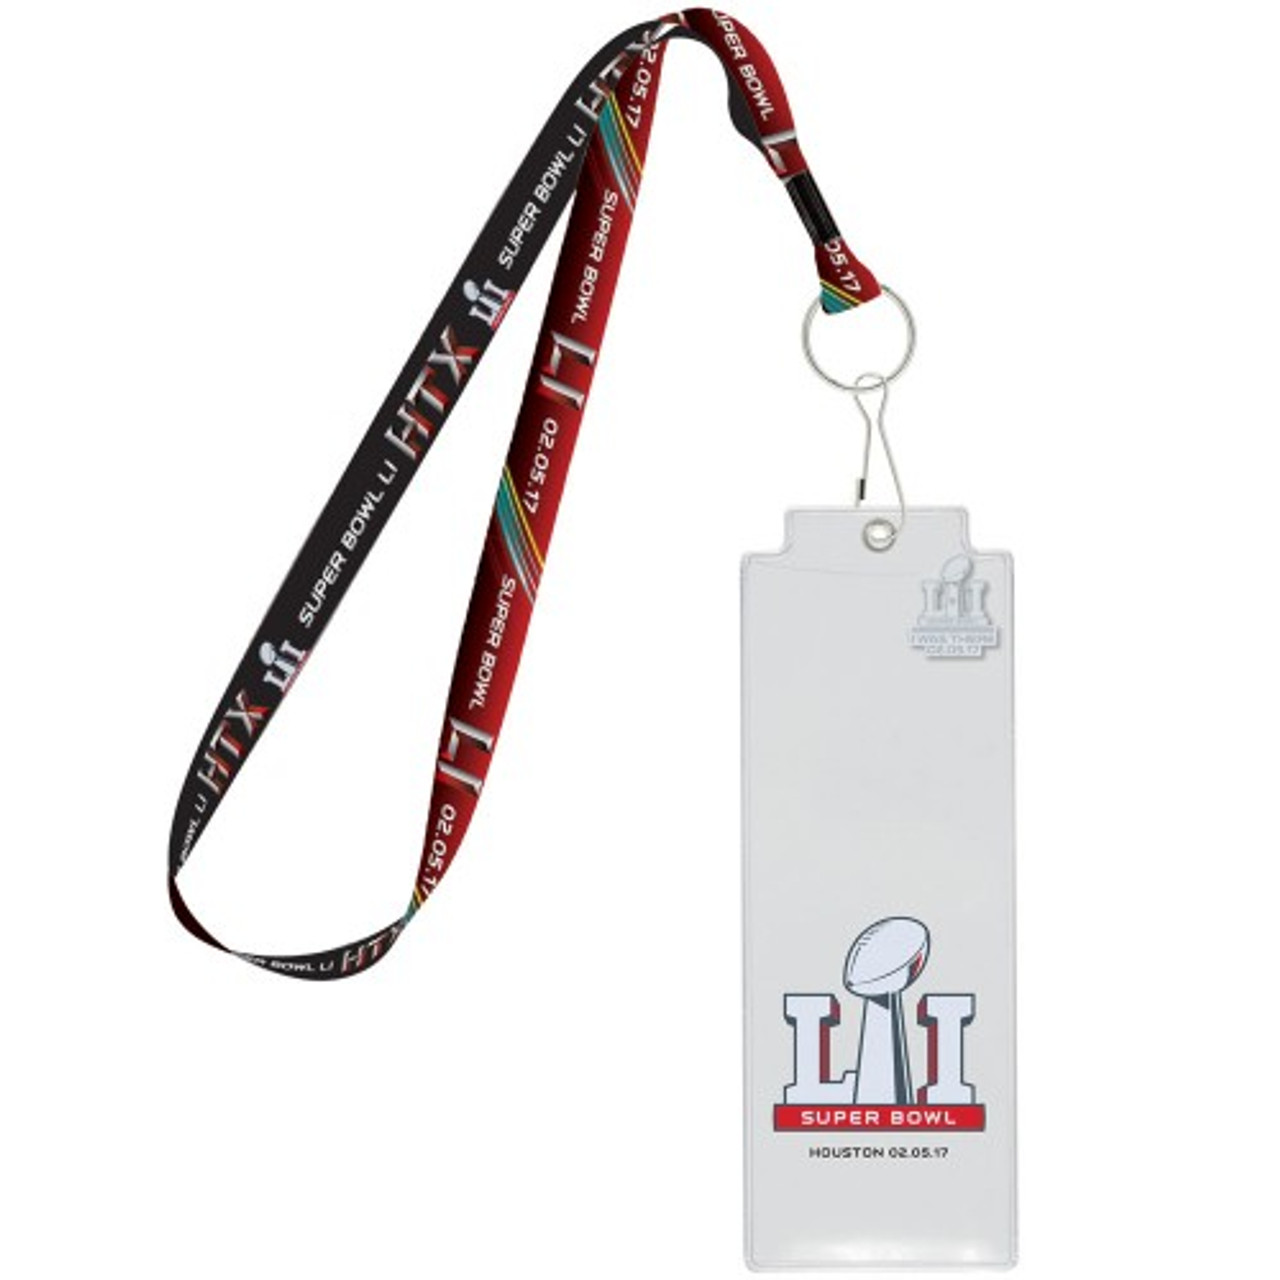 2009 MLB All-Star Game Lanyard w/ Ticket Holder & I Was There Pin